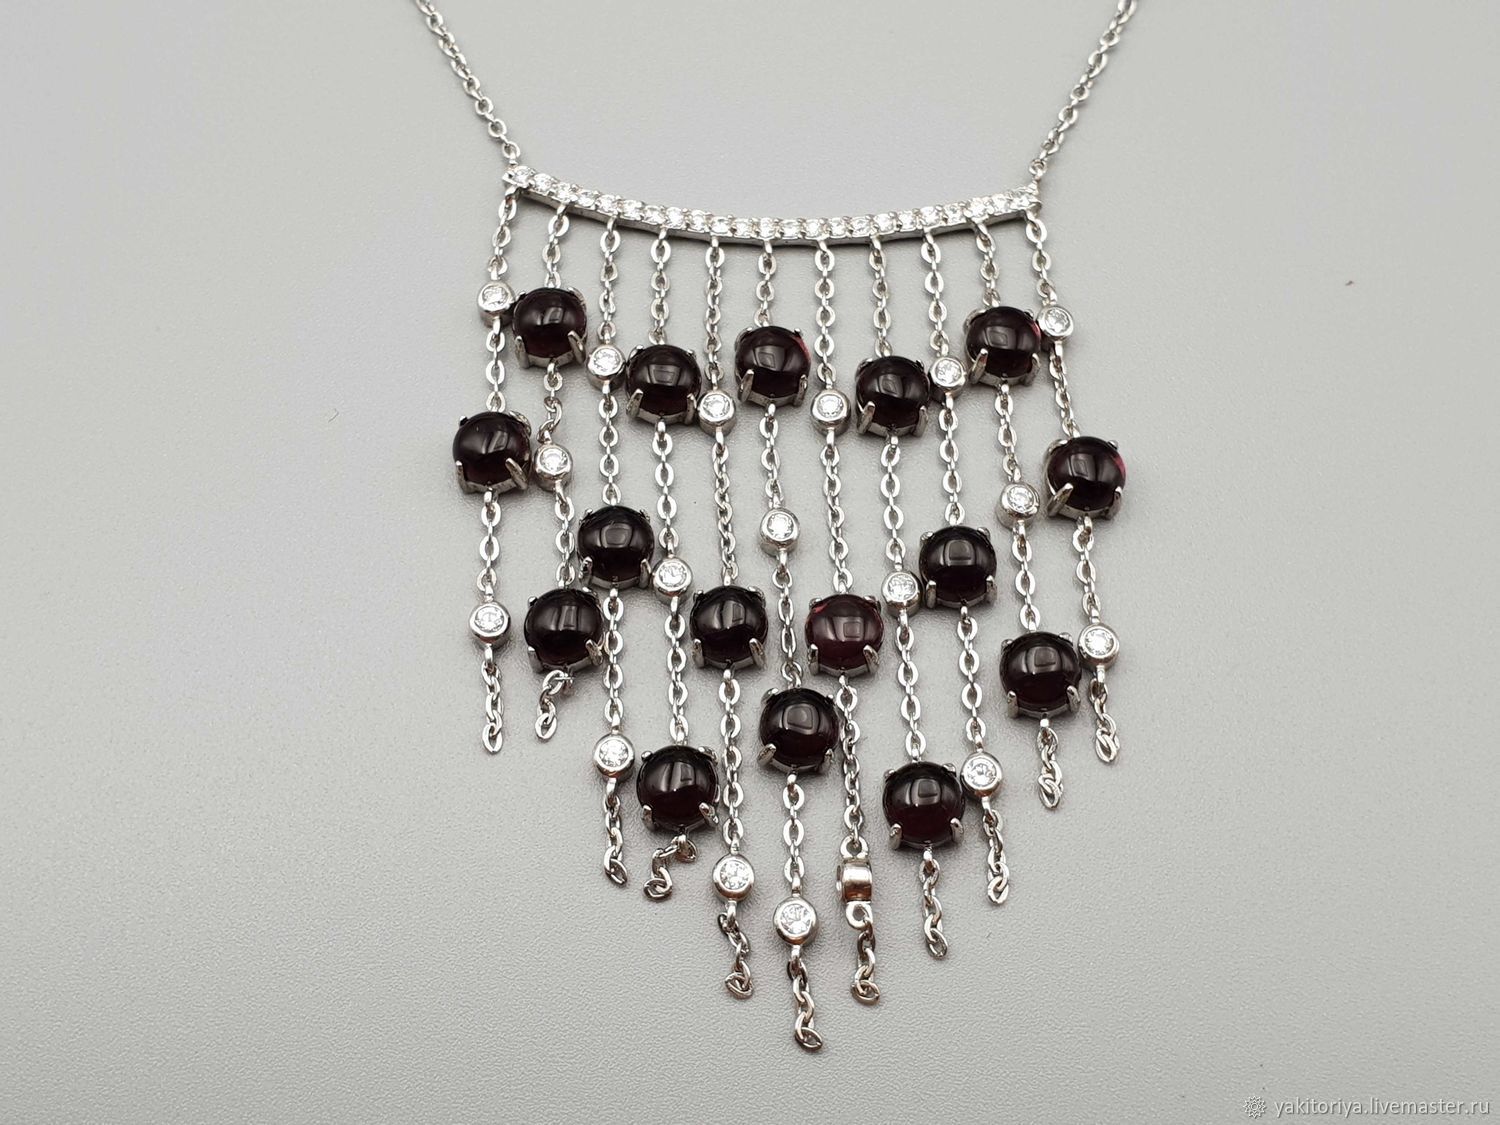 Silver necklace with 6 mm amethyst cabochons, Necklace, Moscow,  Фото №1